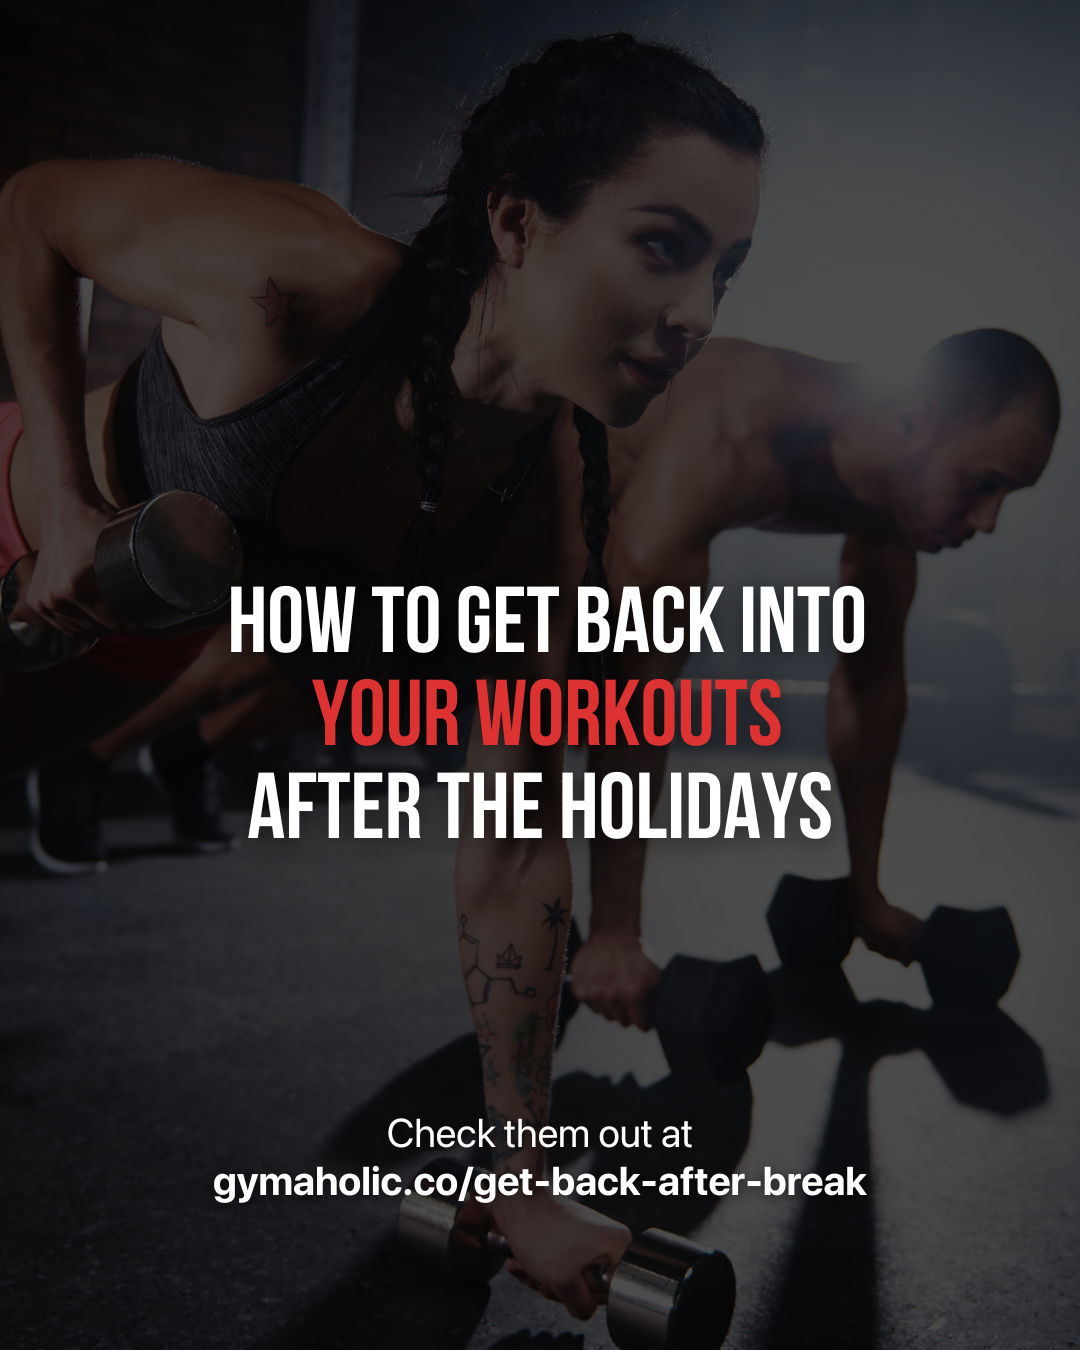 How To Get Back Into Your Workouts After The Holidays